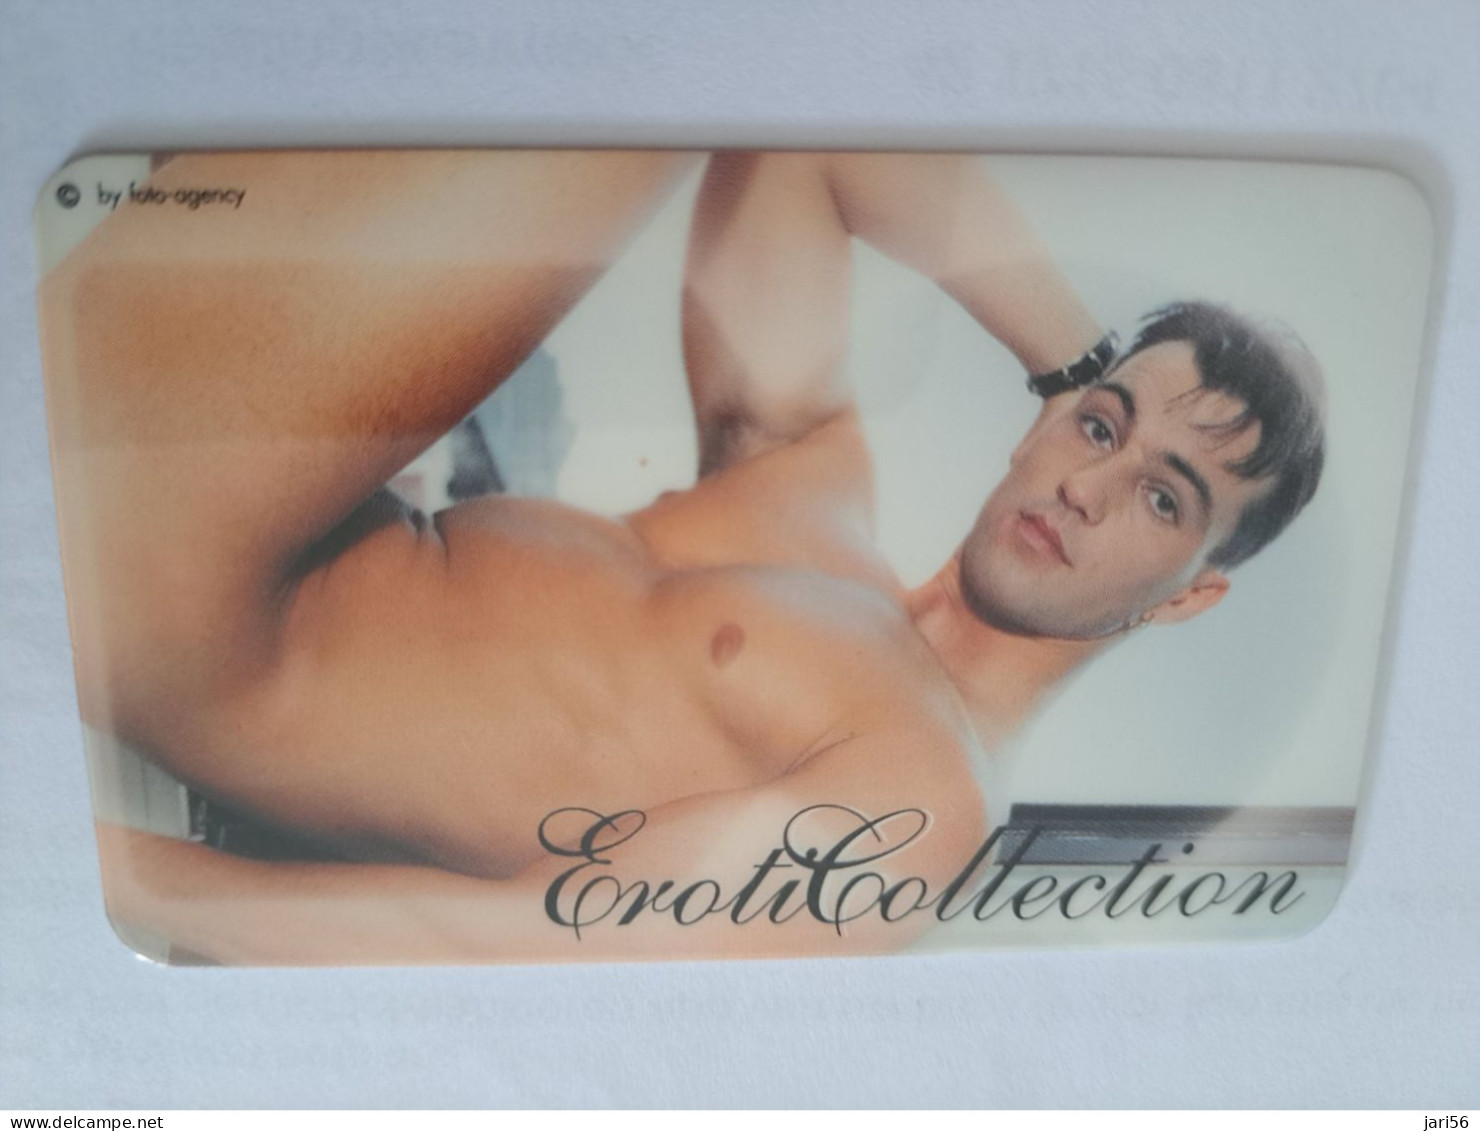 GREAT BRITAIN /20 UNITS / EROTIC COLLECTION / MODEL / NAKED MAN  / (date 09/00)  PREPAID CARD / MINT  **14305** - Verzamelingen